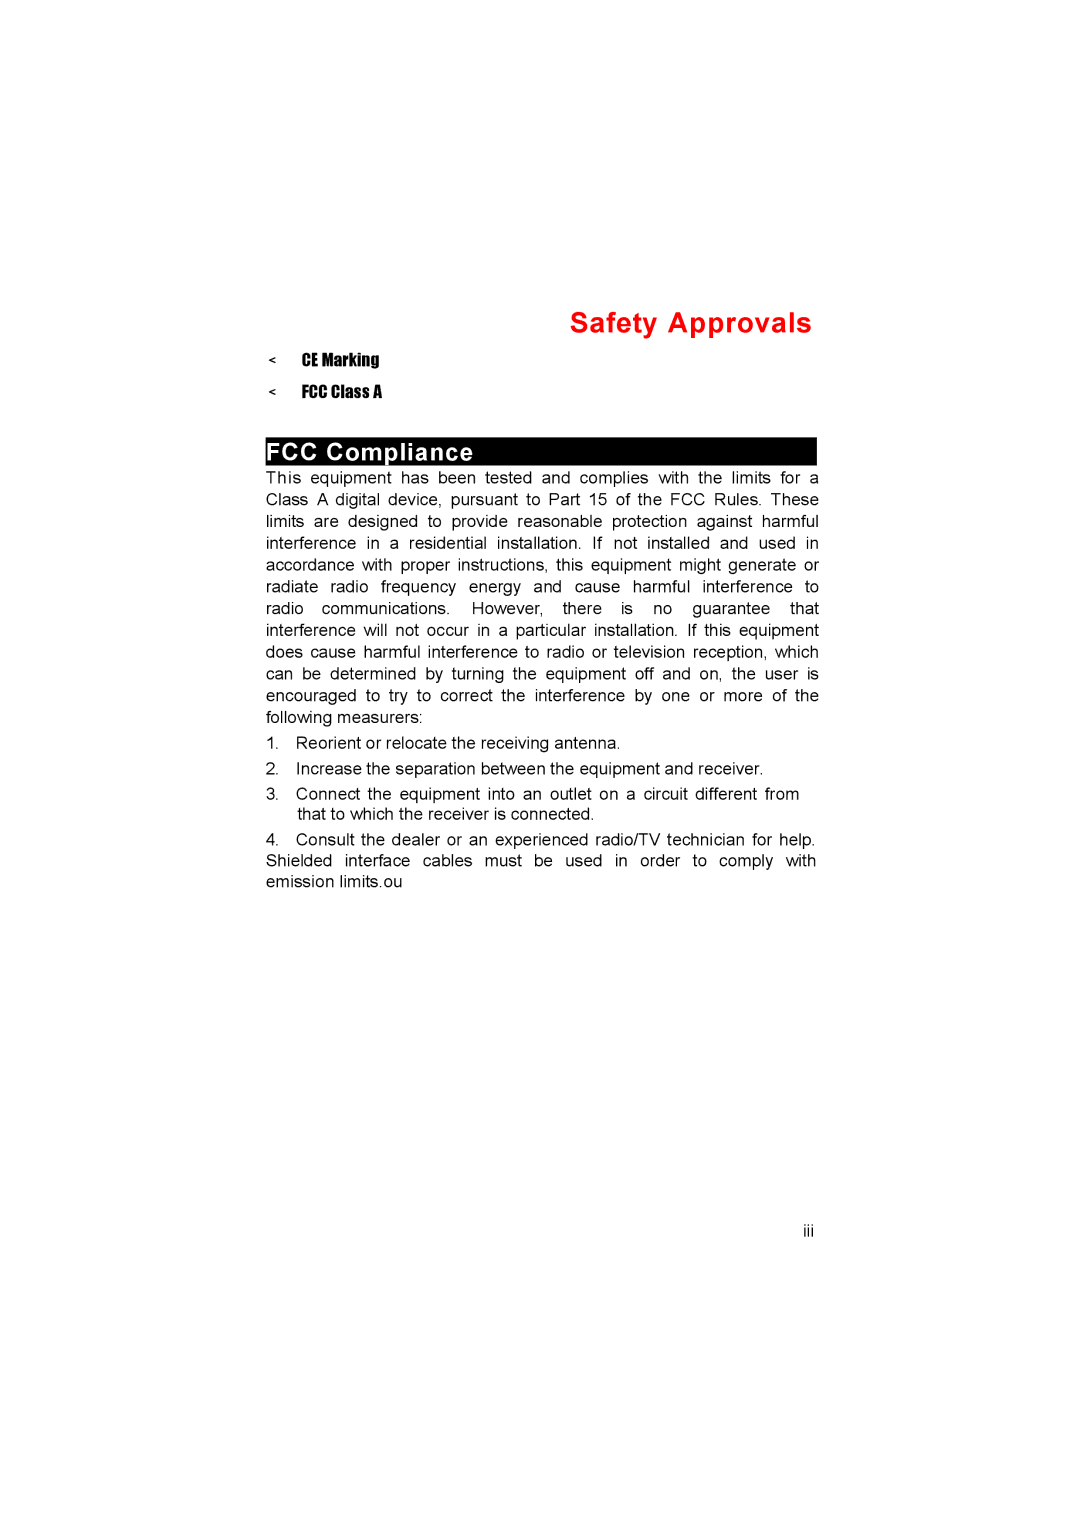 Acnodes PC 6170 manual Safety Approvals, FCC Compliance 